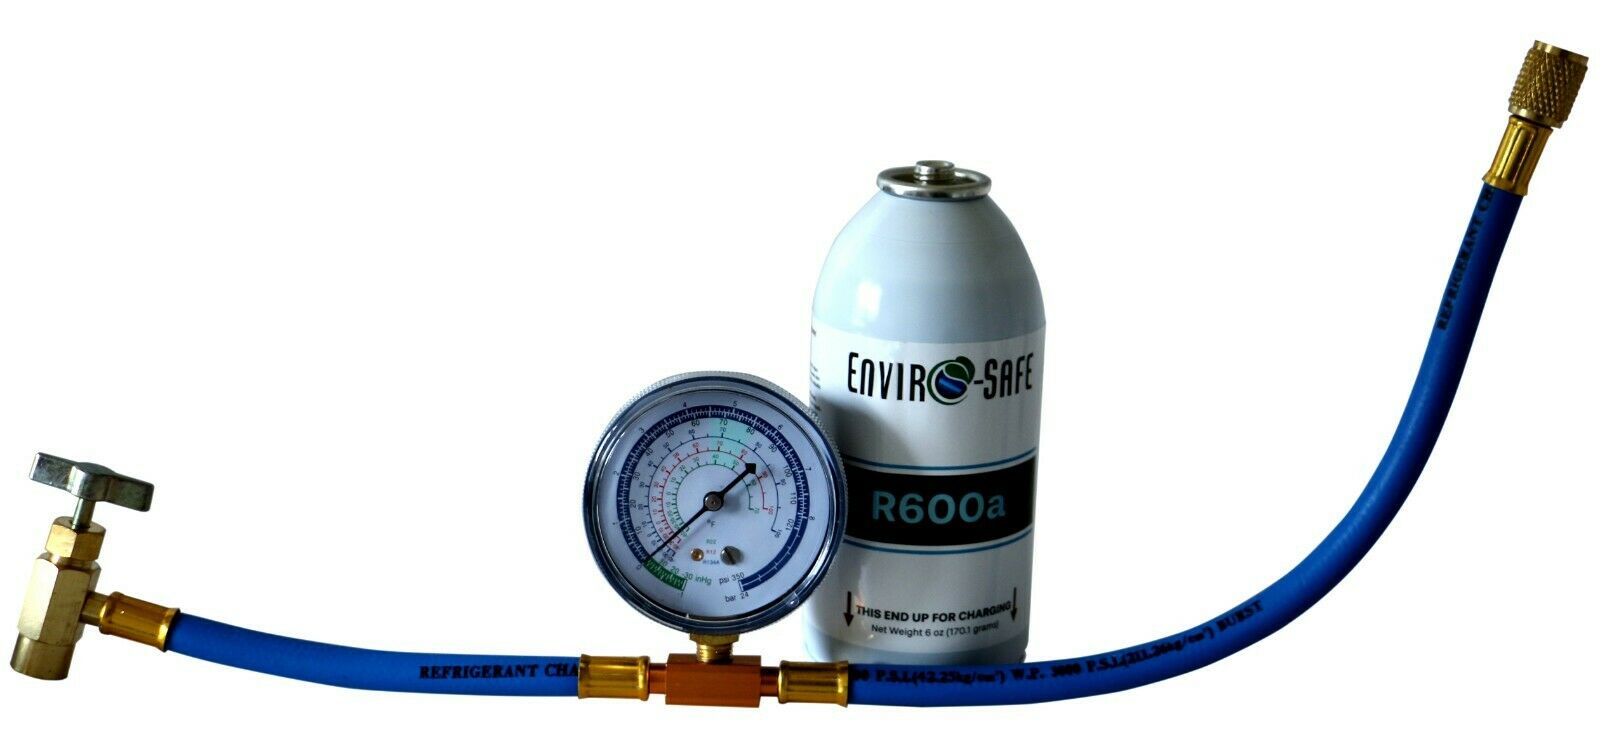 Enviro-safe R600a 1 Can With Gauge Kit #8055